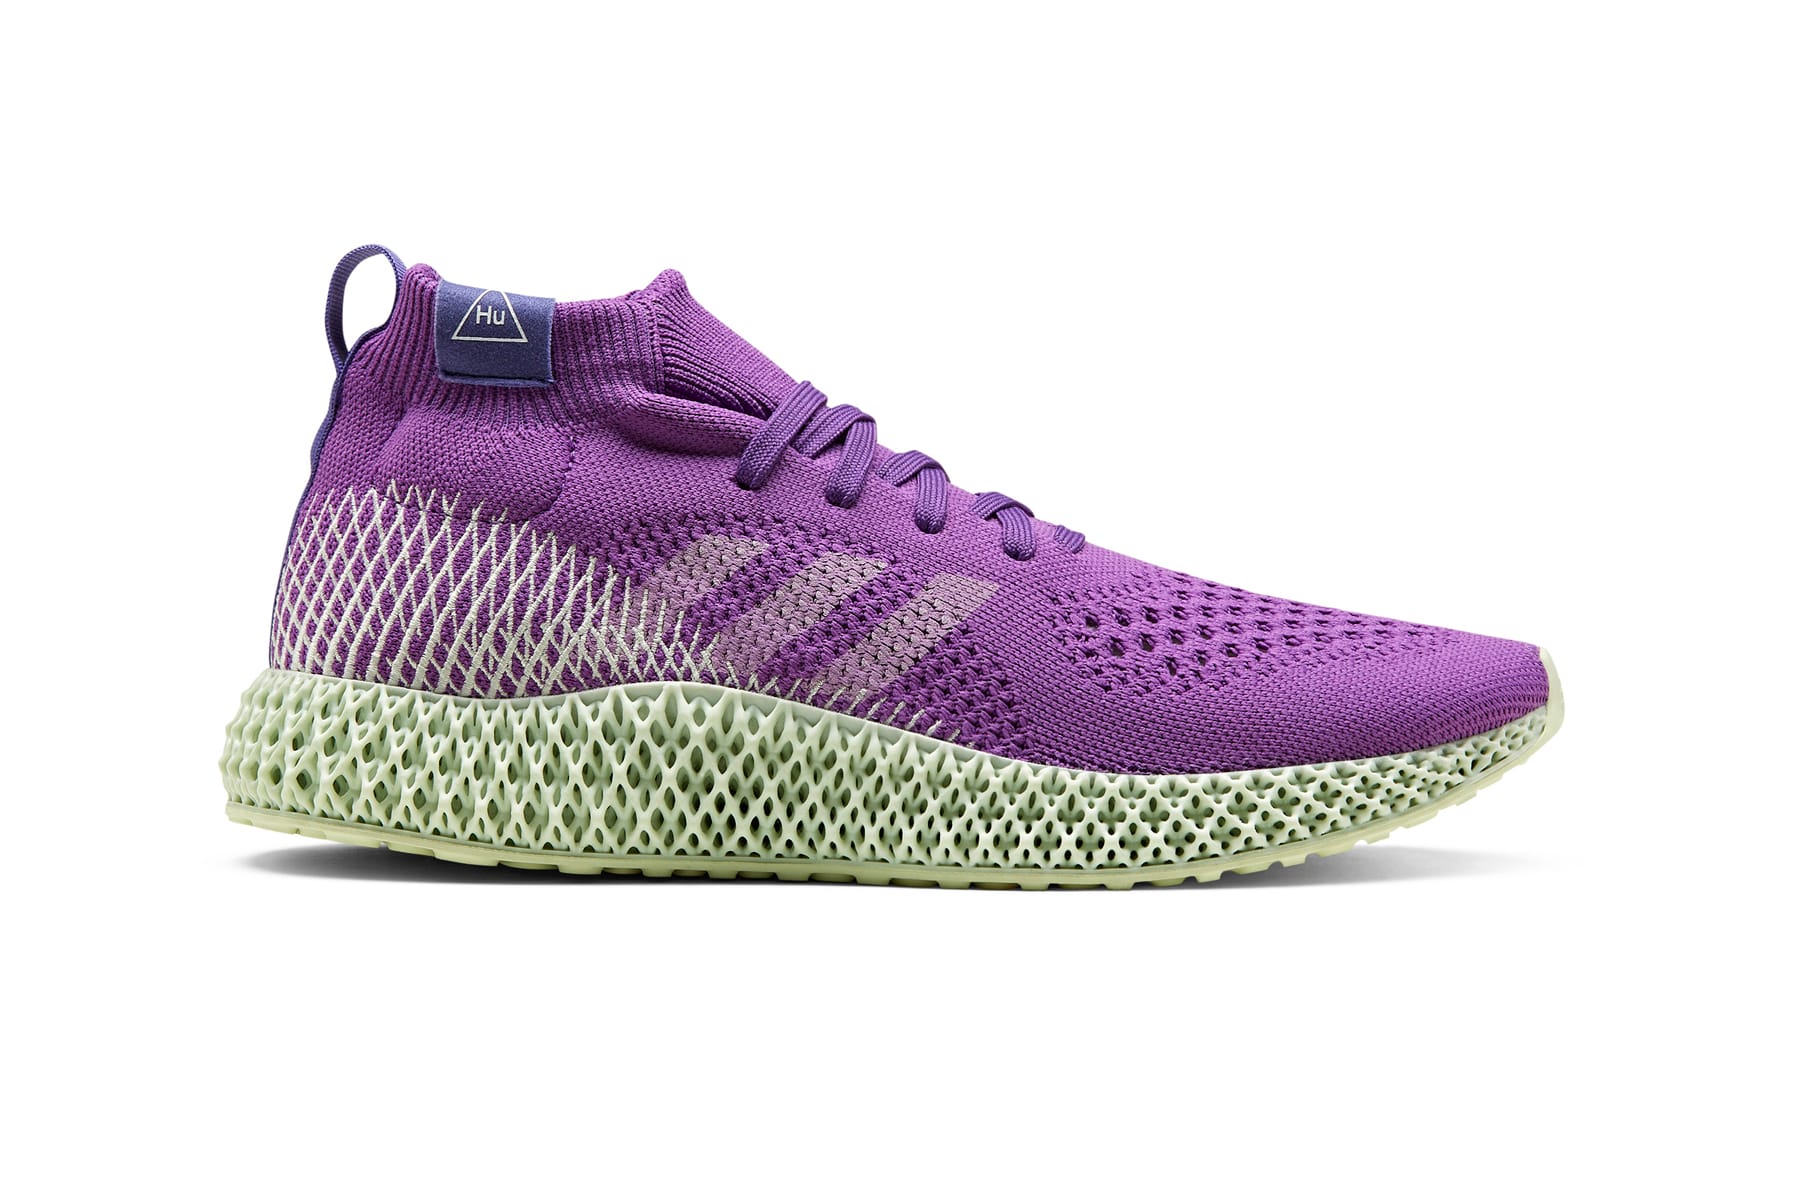 adidas 4d release date 2019